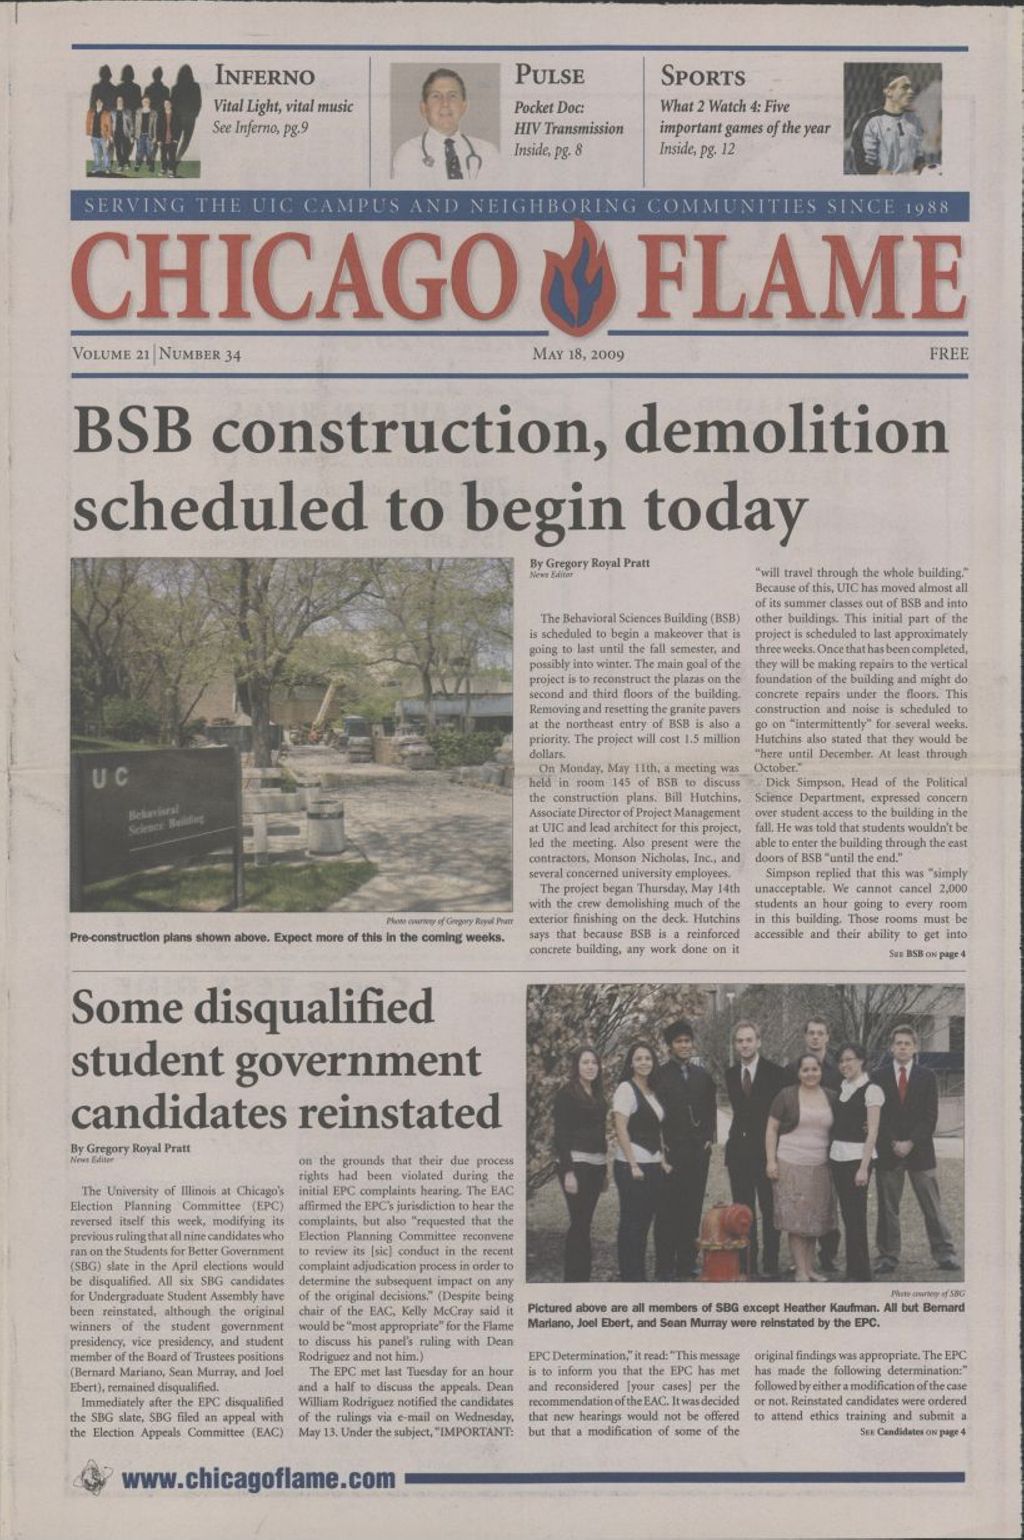 Miniature of Chicago Flame (May 18, 2009)